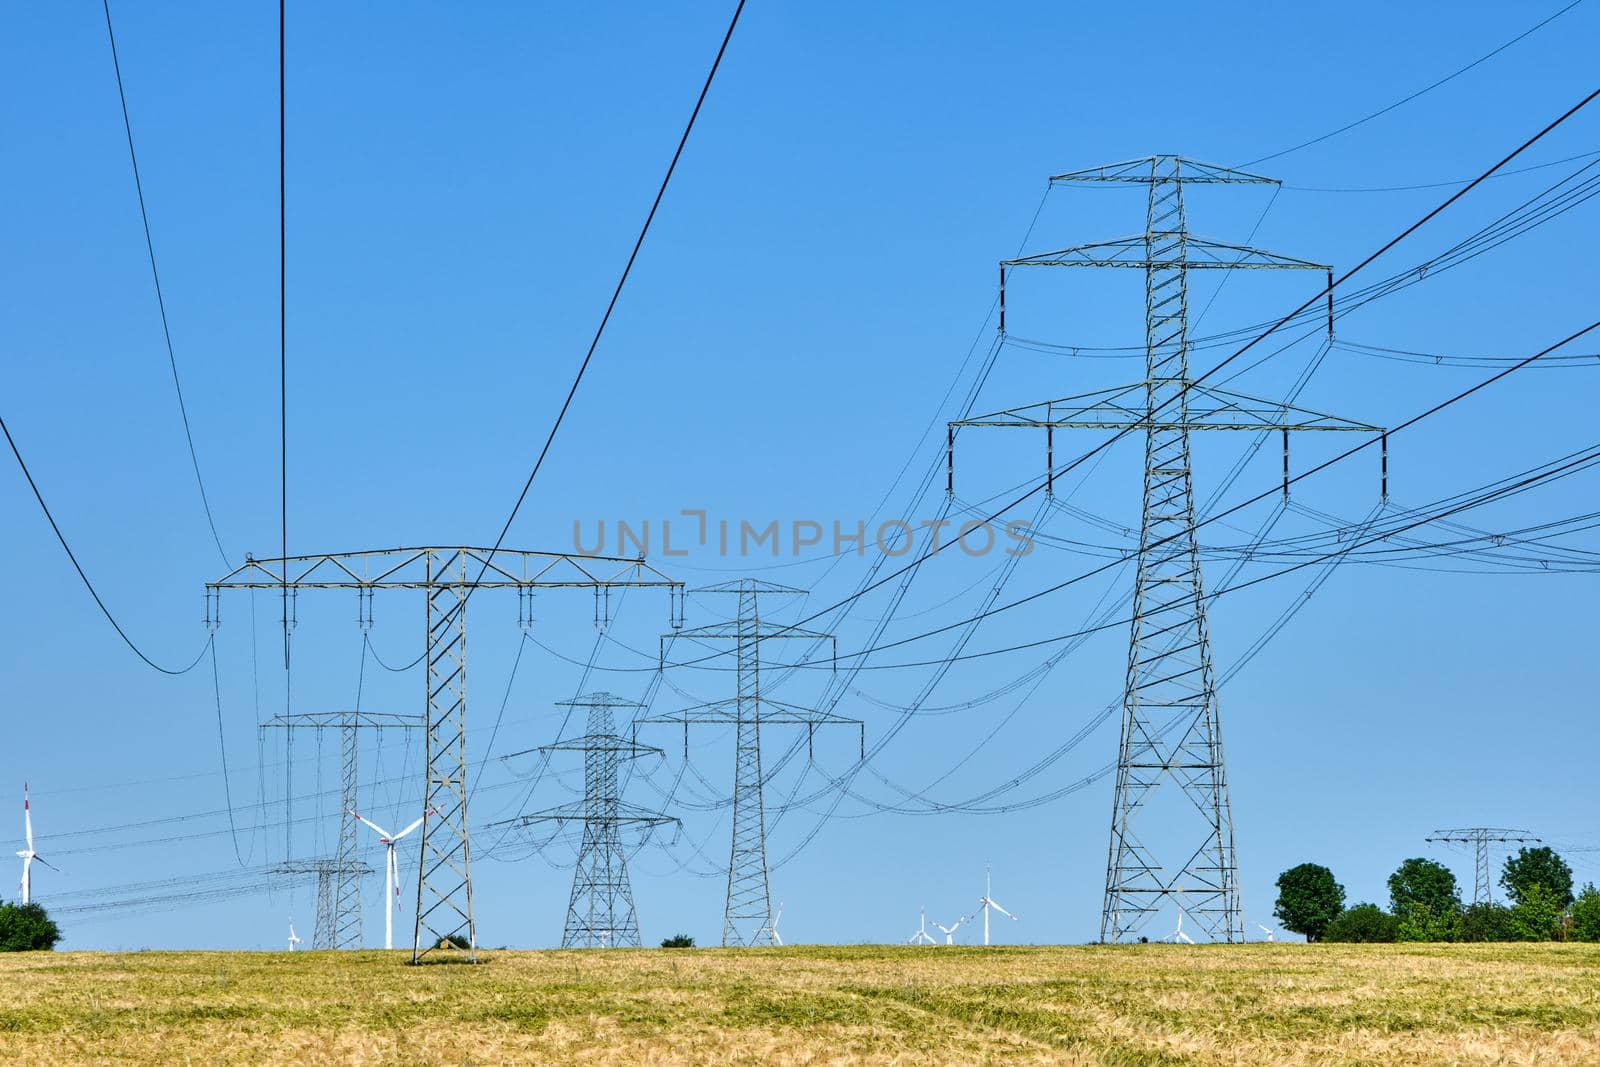 Electricity pylons and power lines with wind turbines in the background